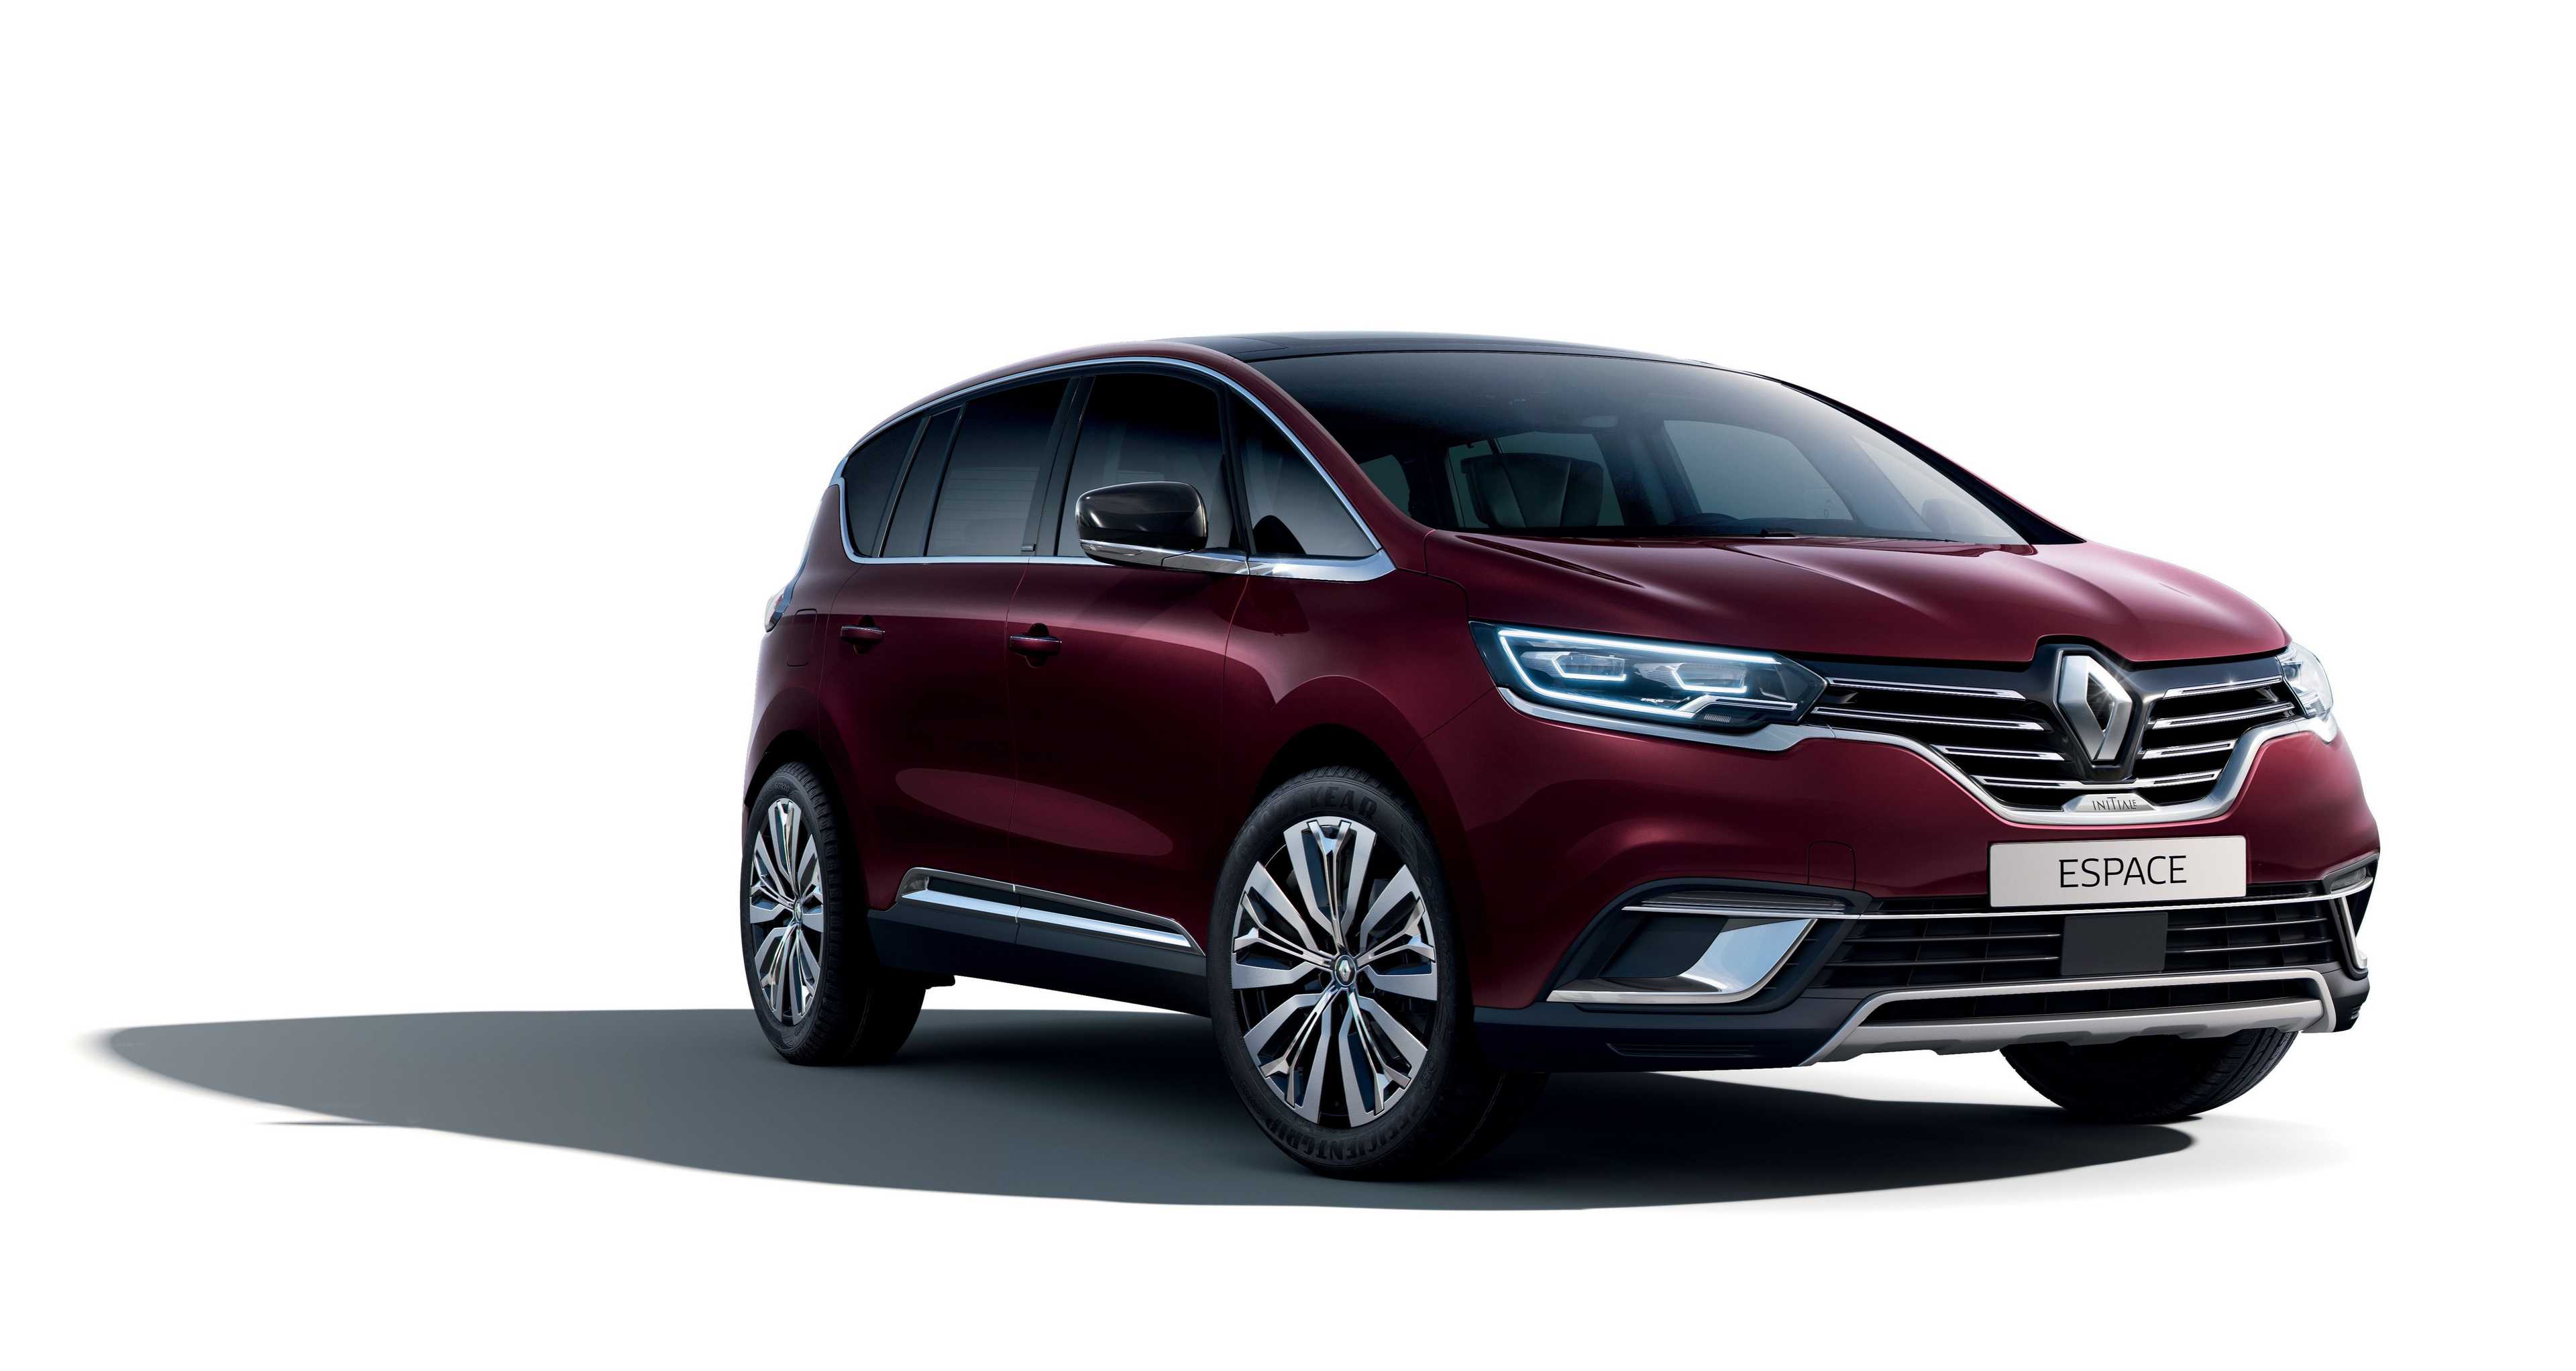 High Quality Tuning Files Renault Espace 2.0 BlueDCI 190hp